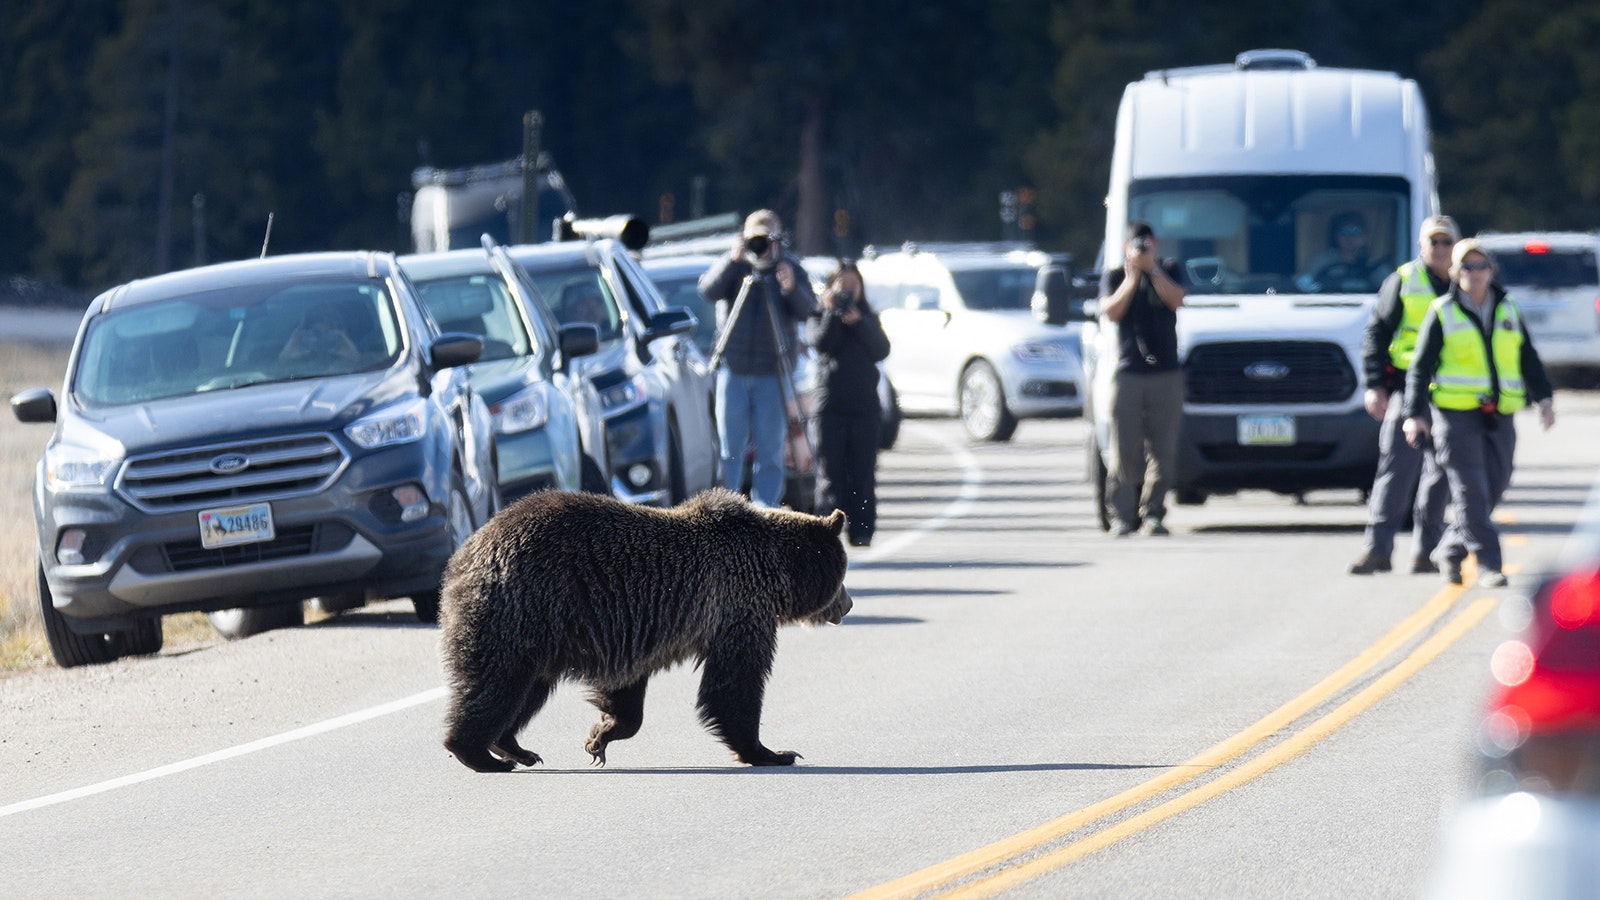 A bear numbered 1063 crosses the road through a "bear jam" in Grand Teton National Park. 1063 had been foraging off one side of the road and had drawn quite the crowd of onlookers. Bear management was there to make sure people were behaving respectfully and keeping a safe distance away. 1063 started to approach the road, and eventually crossed, where she went right back to foraging. Cook said she feels the "bear jams" (traffic jams caused by bears) tend to be much more crowded in Grand Teton National Park than Yellowstone.